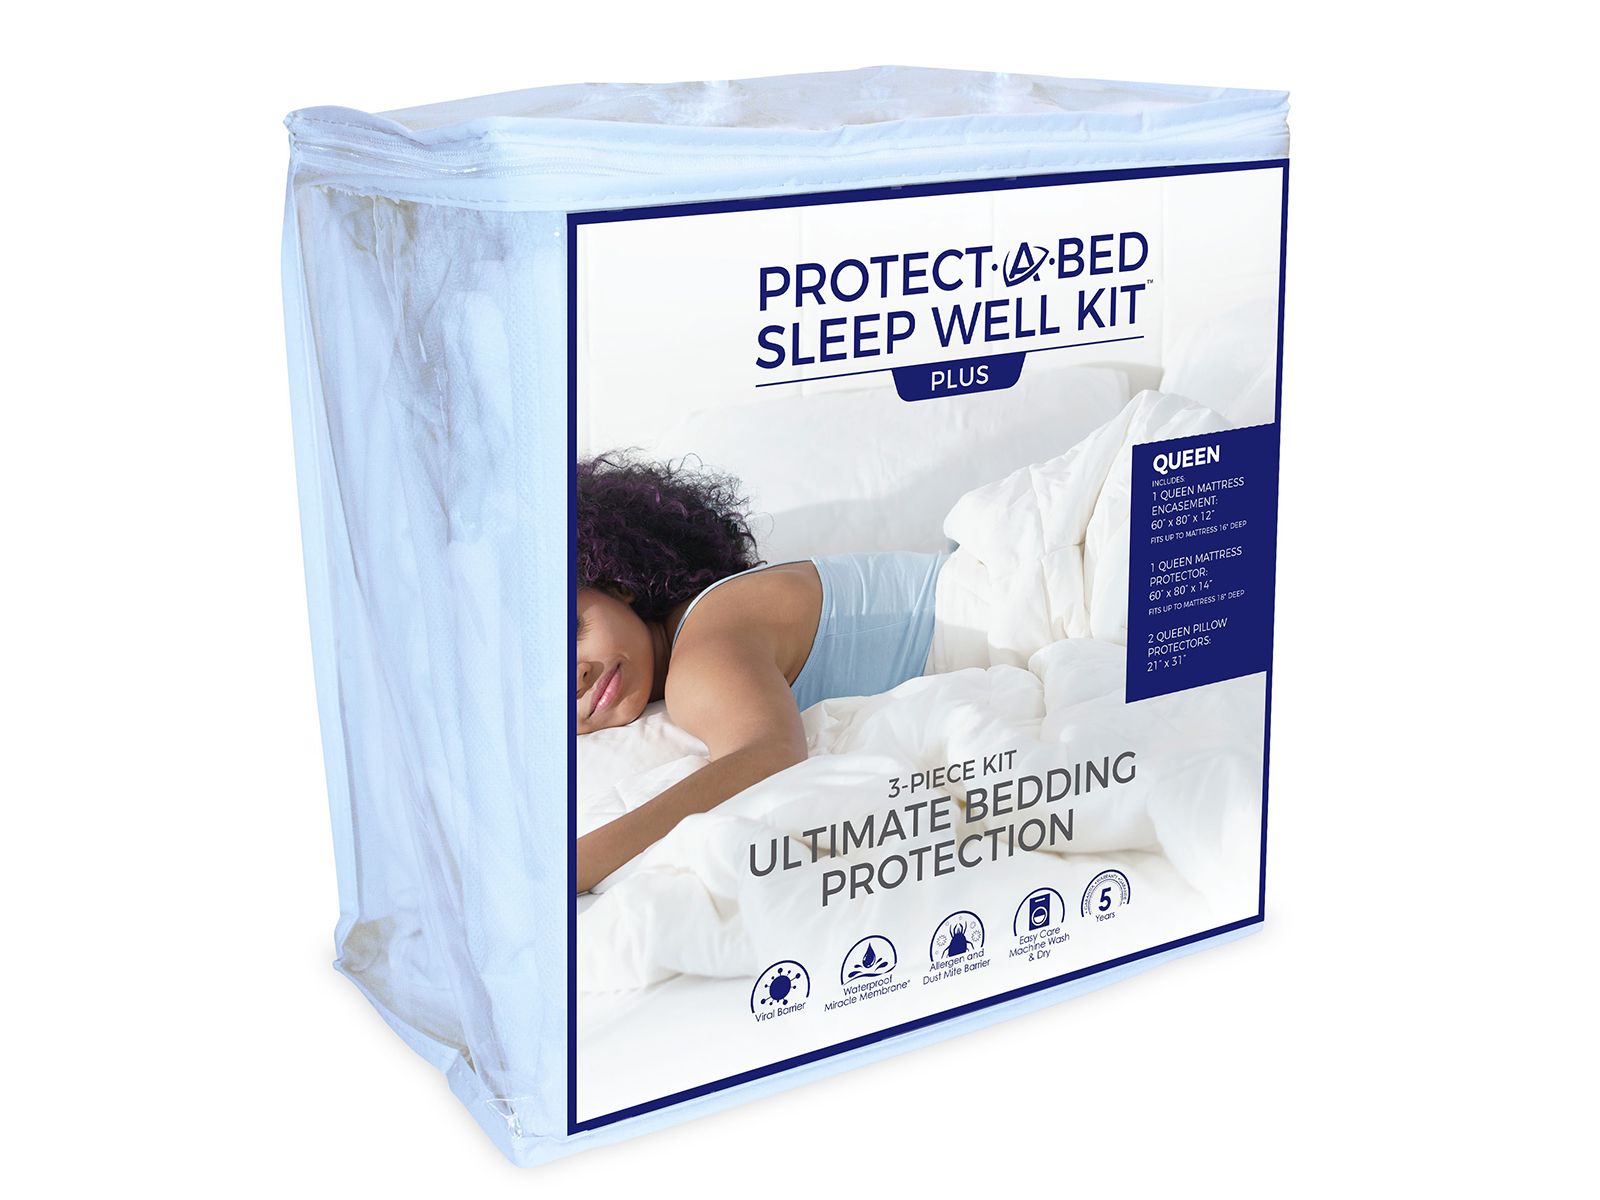 Protect-A-Bed Queen Sleep Well Kit